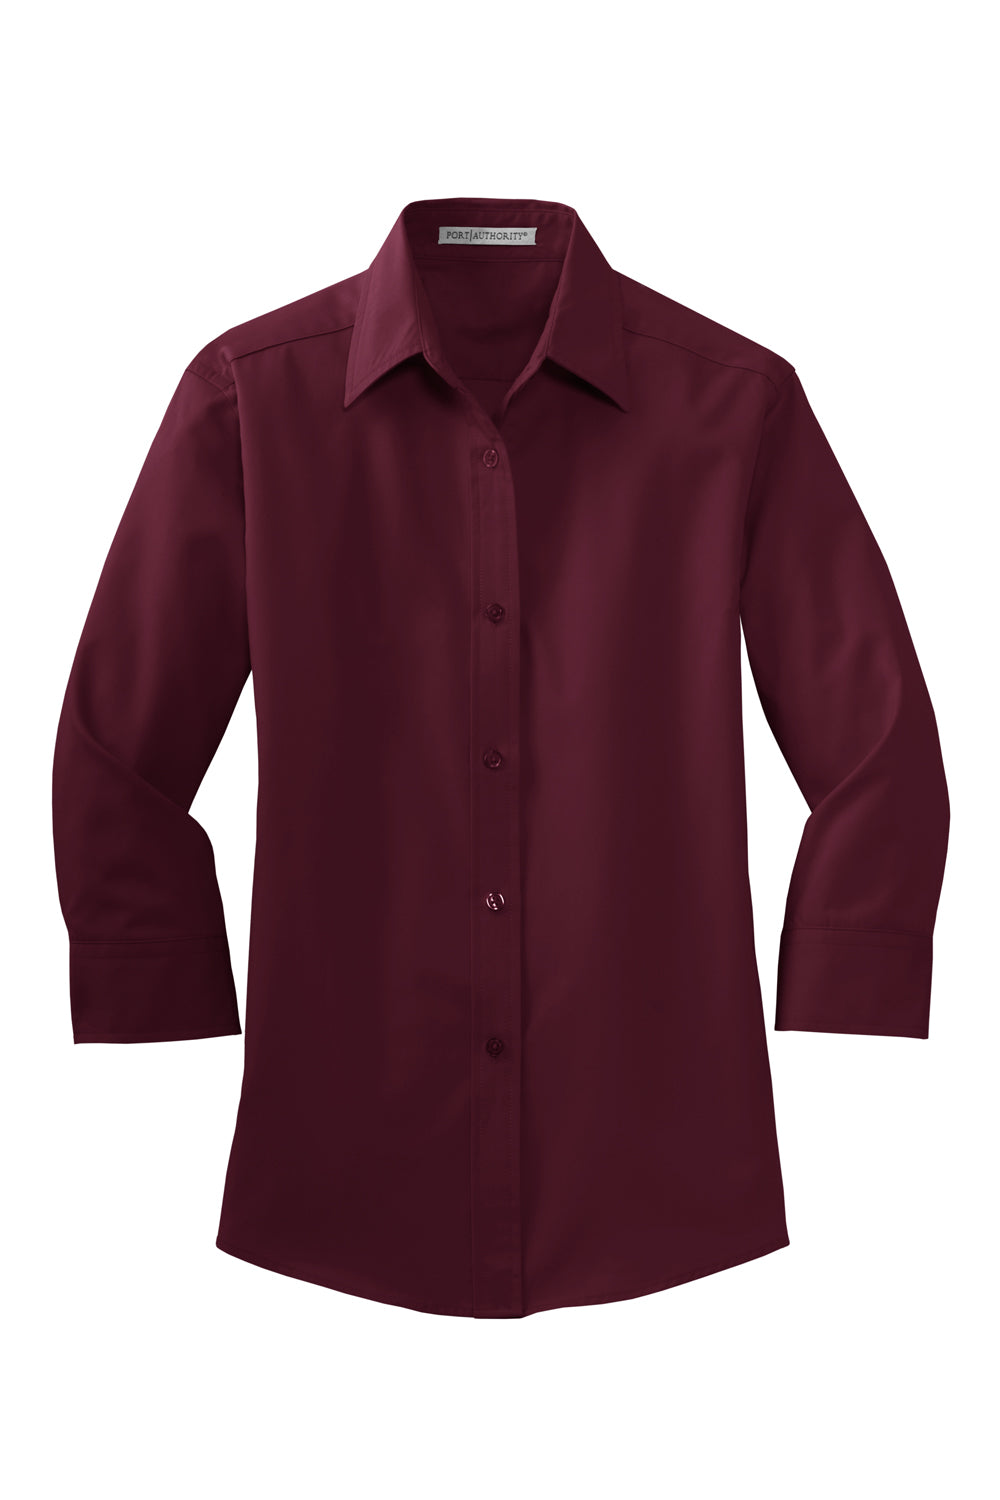 Port Authority L612 Womens Easy Care Wrinkle Resistant 3/4 Sleeve Button Down Shirt Burgundy Flat Front